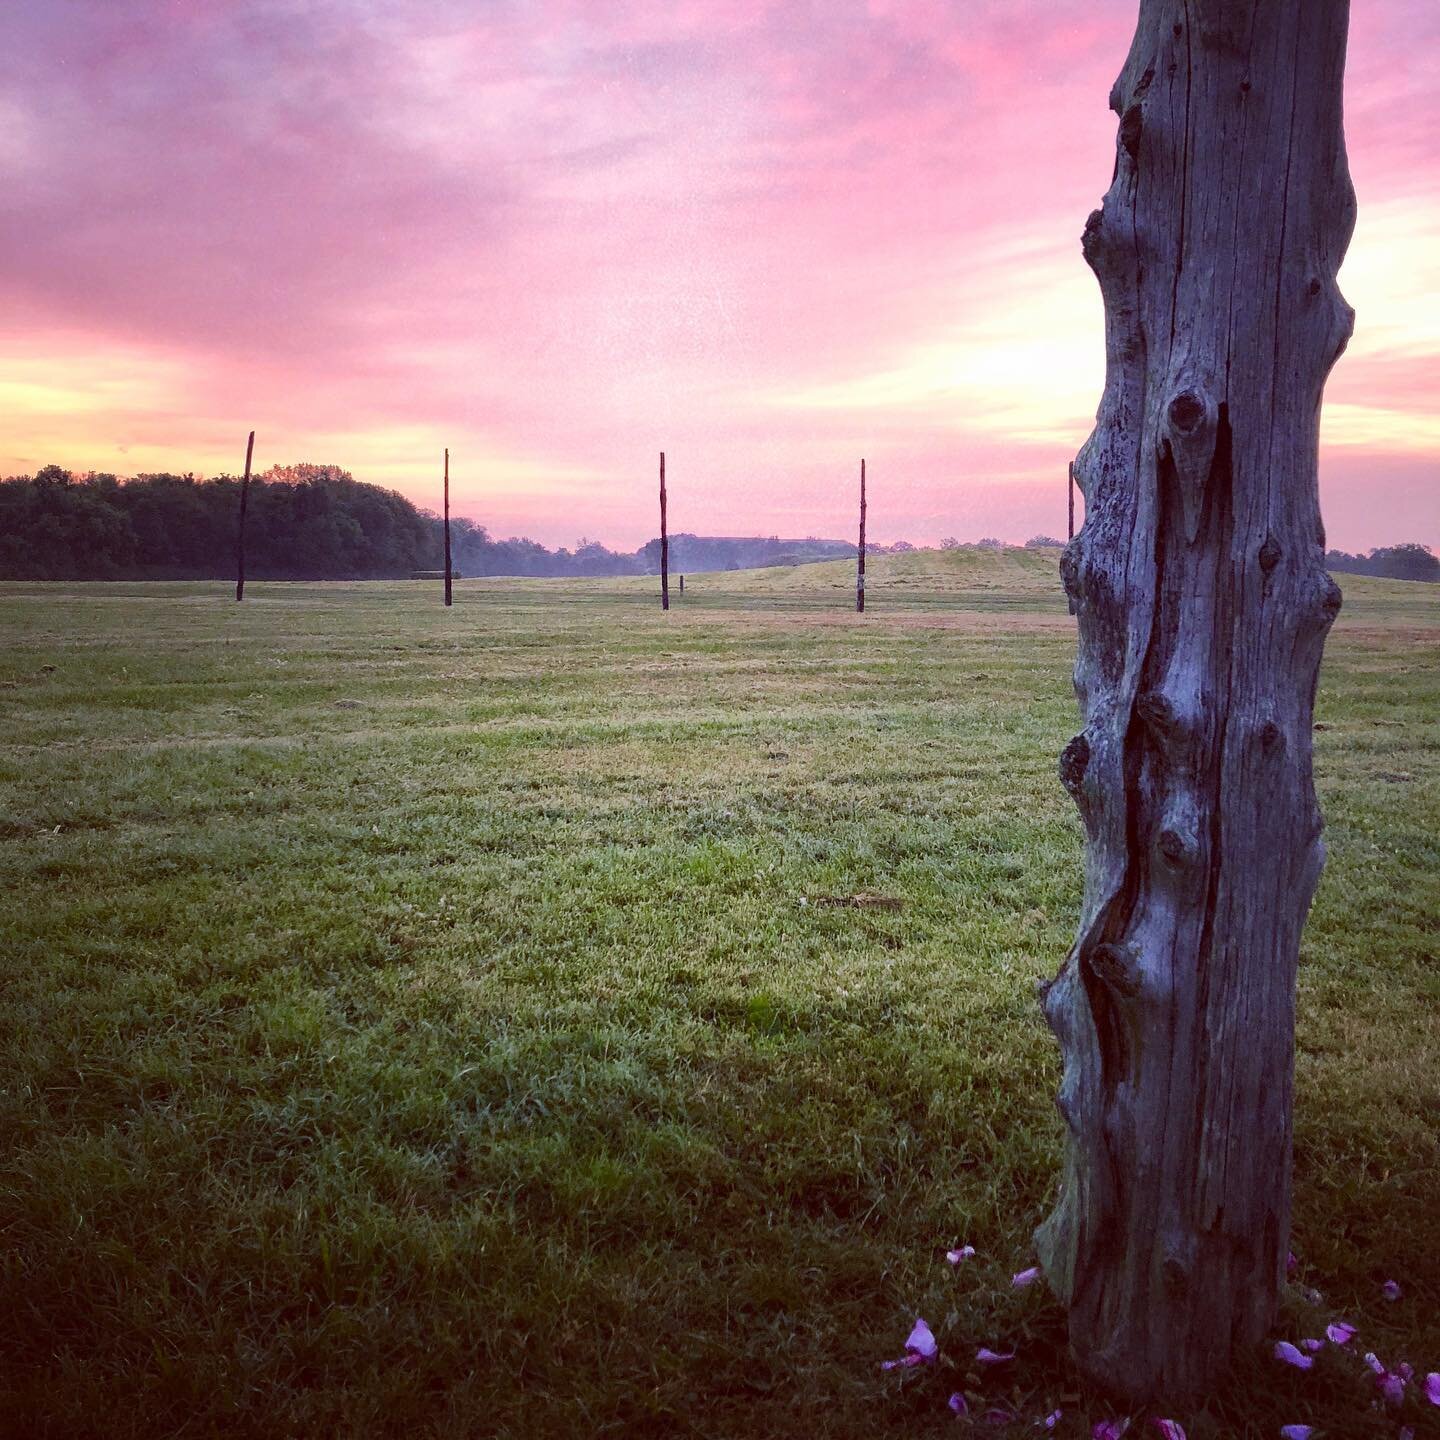 This morning I went to the Cahokia Mounds to watch the sunrise at Woodhenge to honor the Fall Equinox. It&rsquo;s an ancient replica of a sacred site that functioned similarly to Stonehenge. Uncharacteristically there was fog creating mists of Avalon